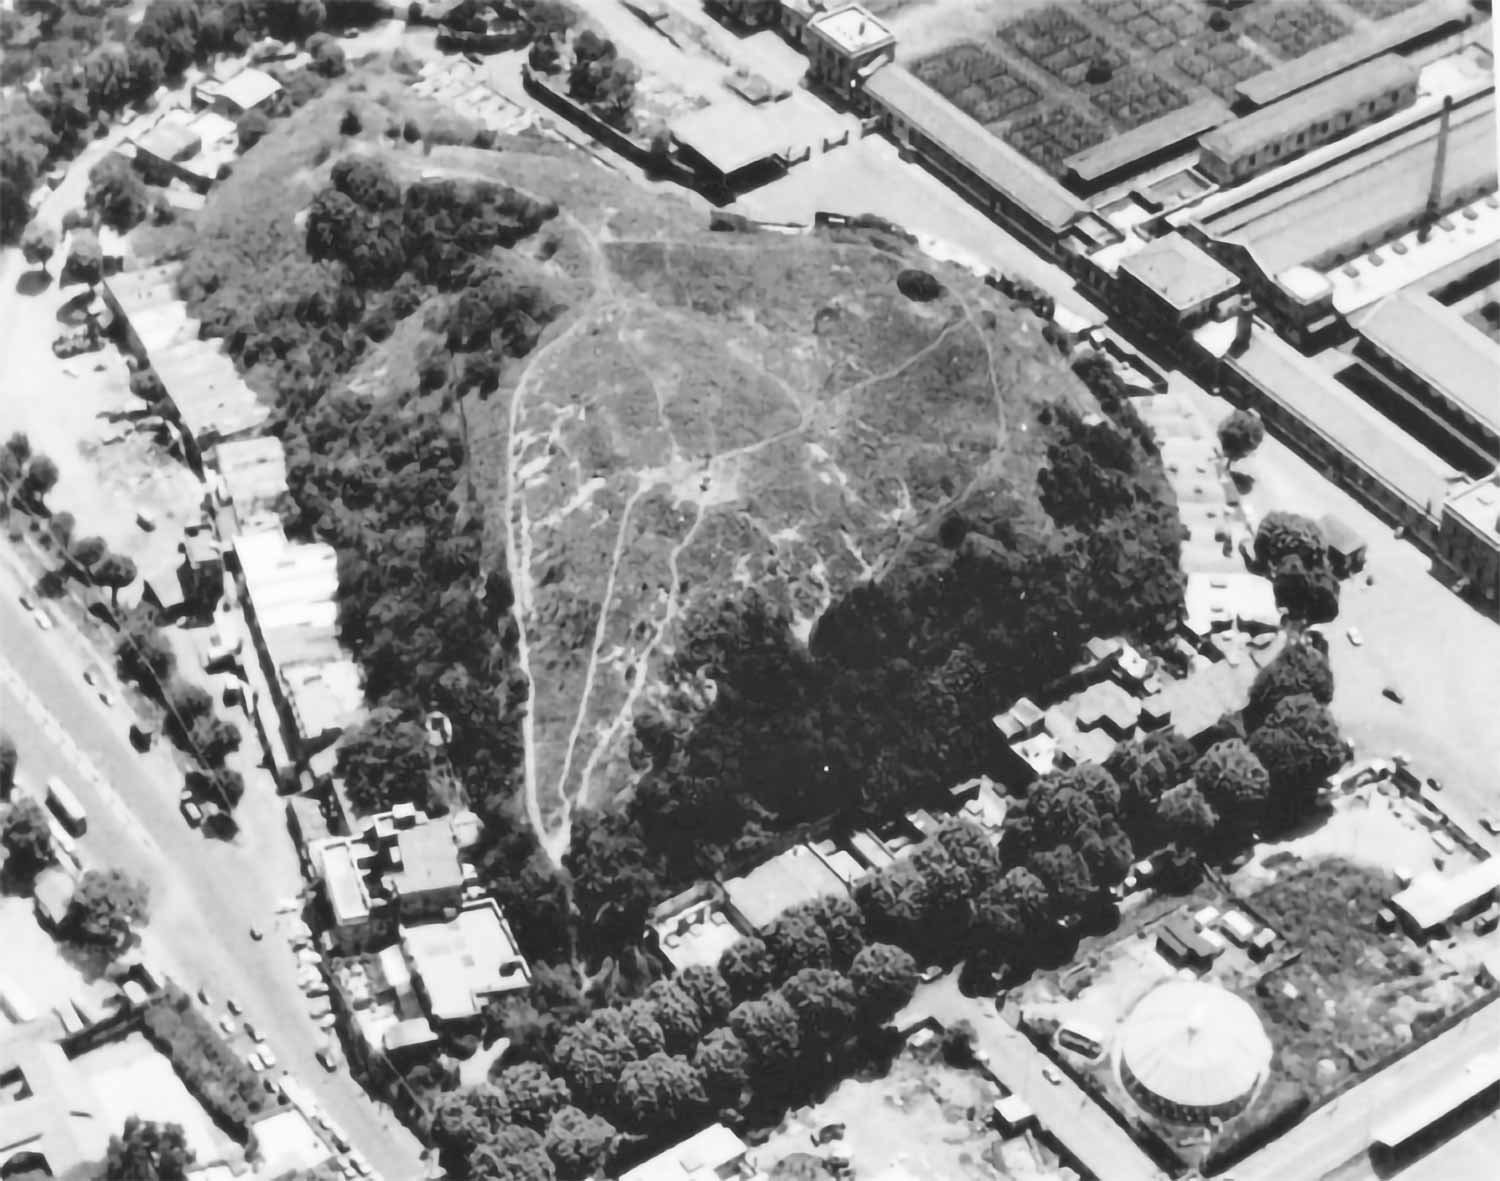 The tendency of the artificial to become natural again. Monte Testaccio is an ancient site made of 50 million crushed olive oil jugs. Source: Archeologica Multimediale Testaccio Aventino.